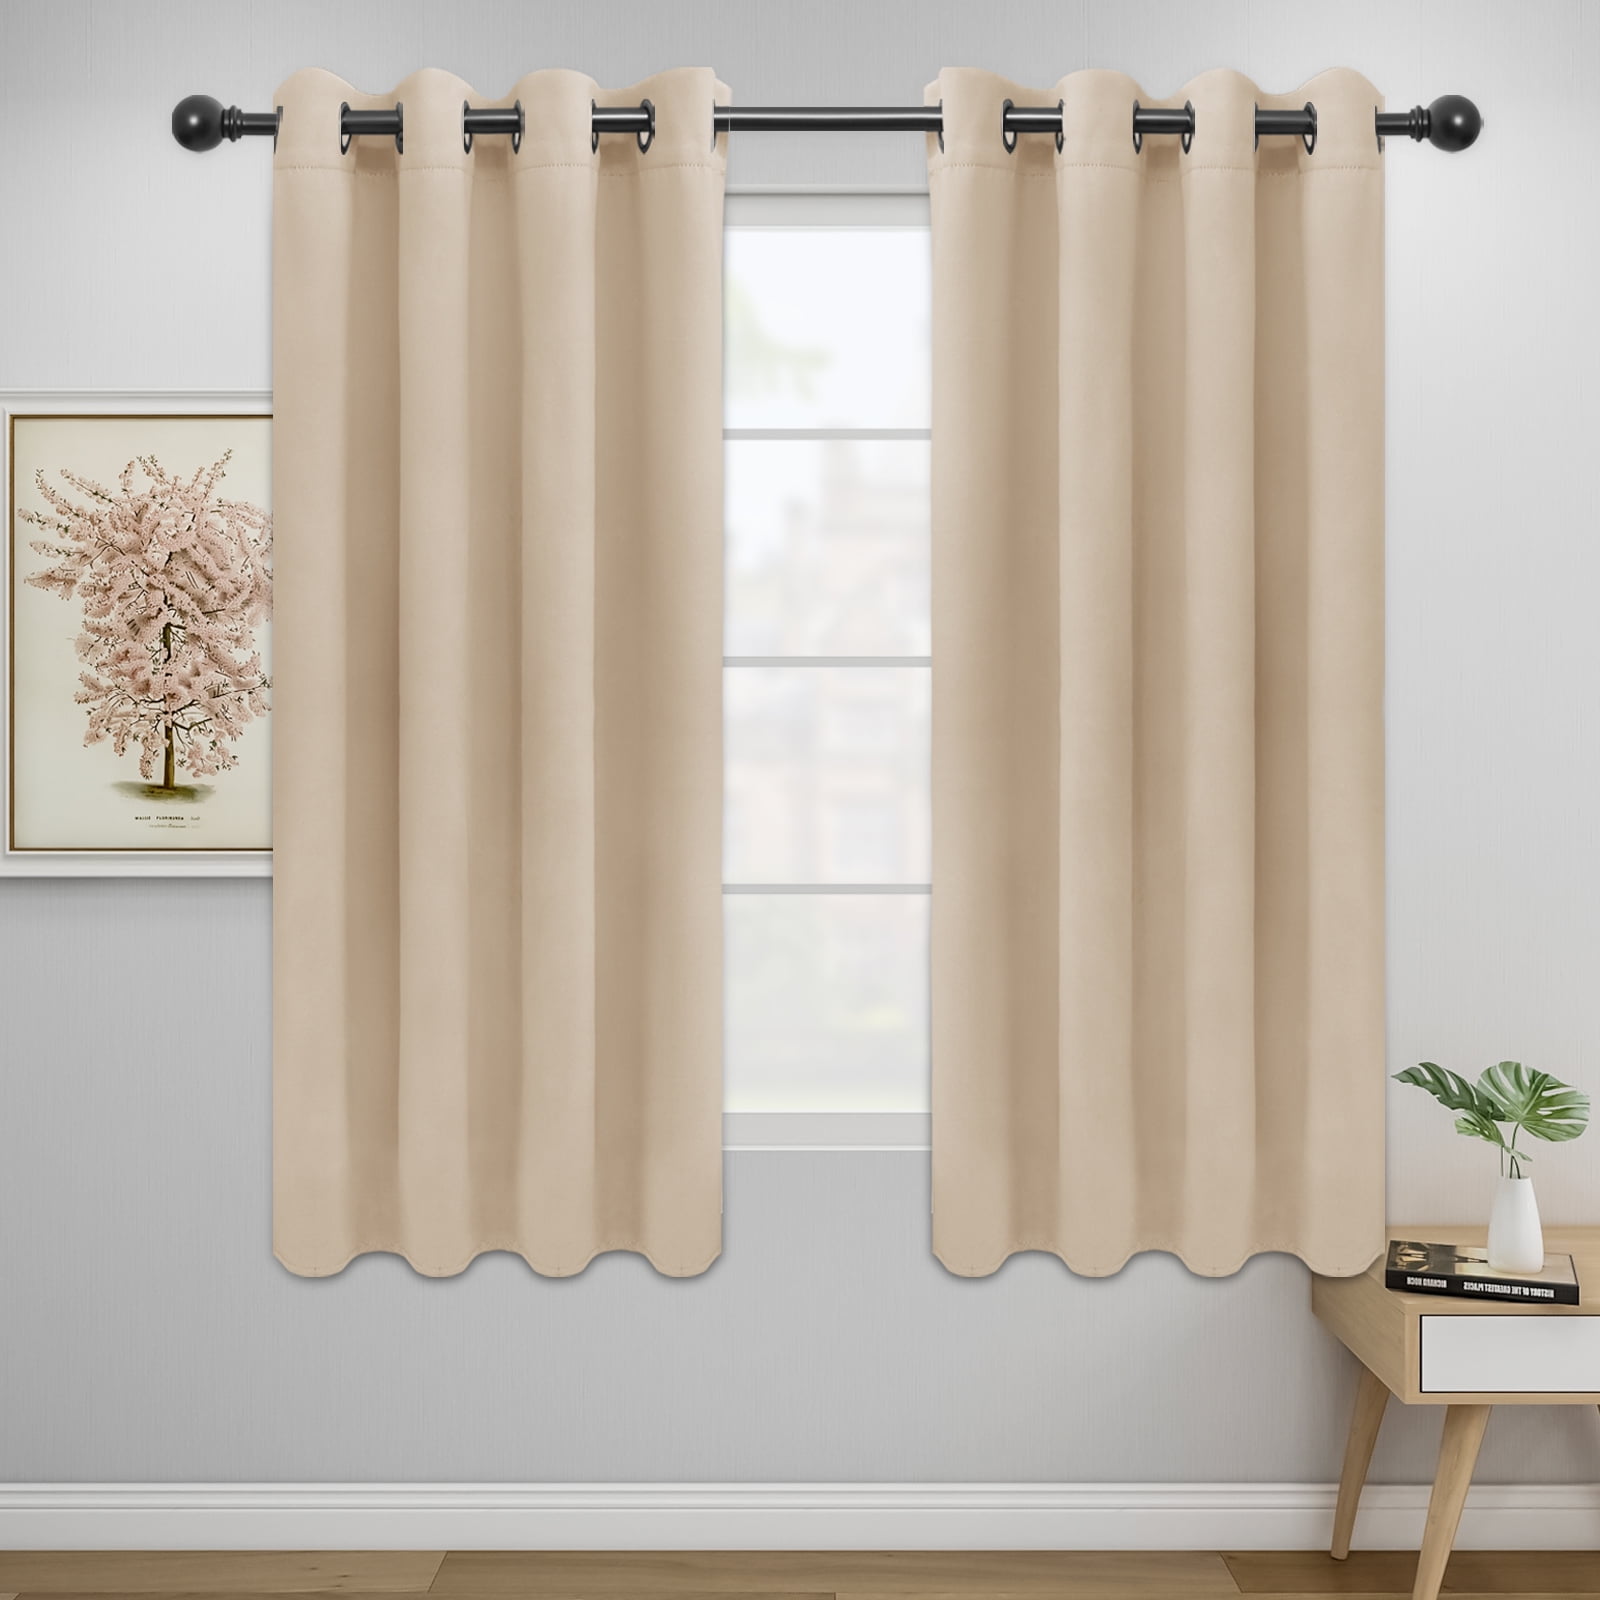 Eyelet Blackout Curtain White Mouse Animal Pencil Pleat Curtains Energy Saving Thermal Insulated Noise Reducing Solid Curtain Drapes Room Darkening for Childrens Livingroom Bedroom Kitchen 55 x 63